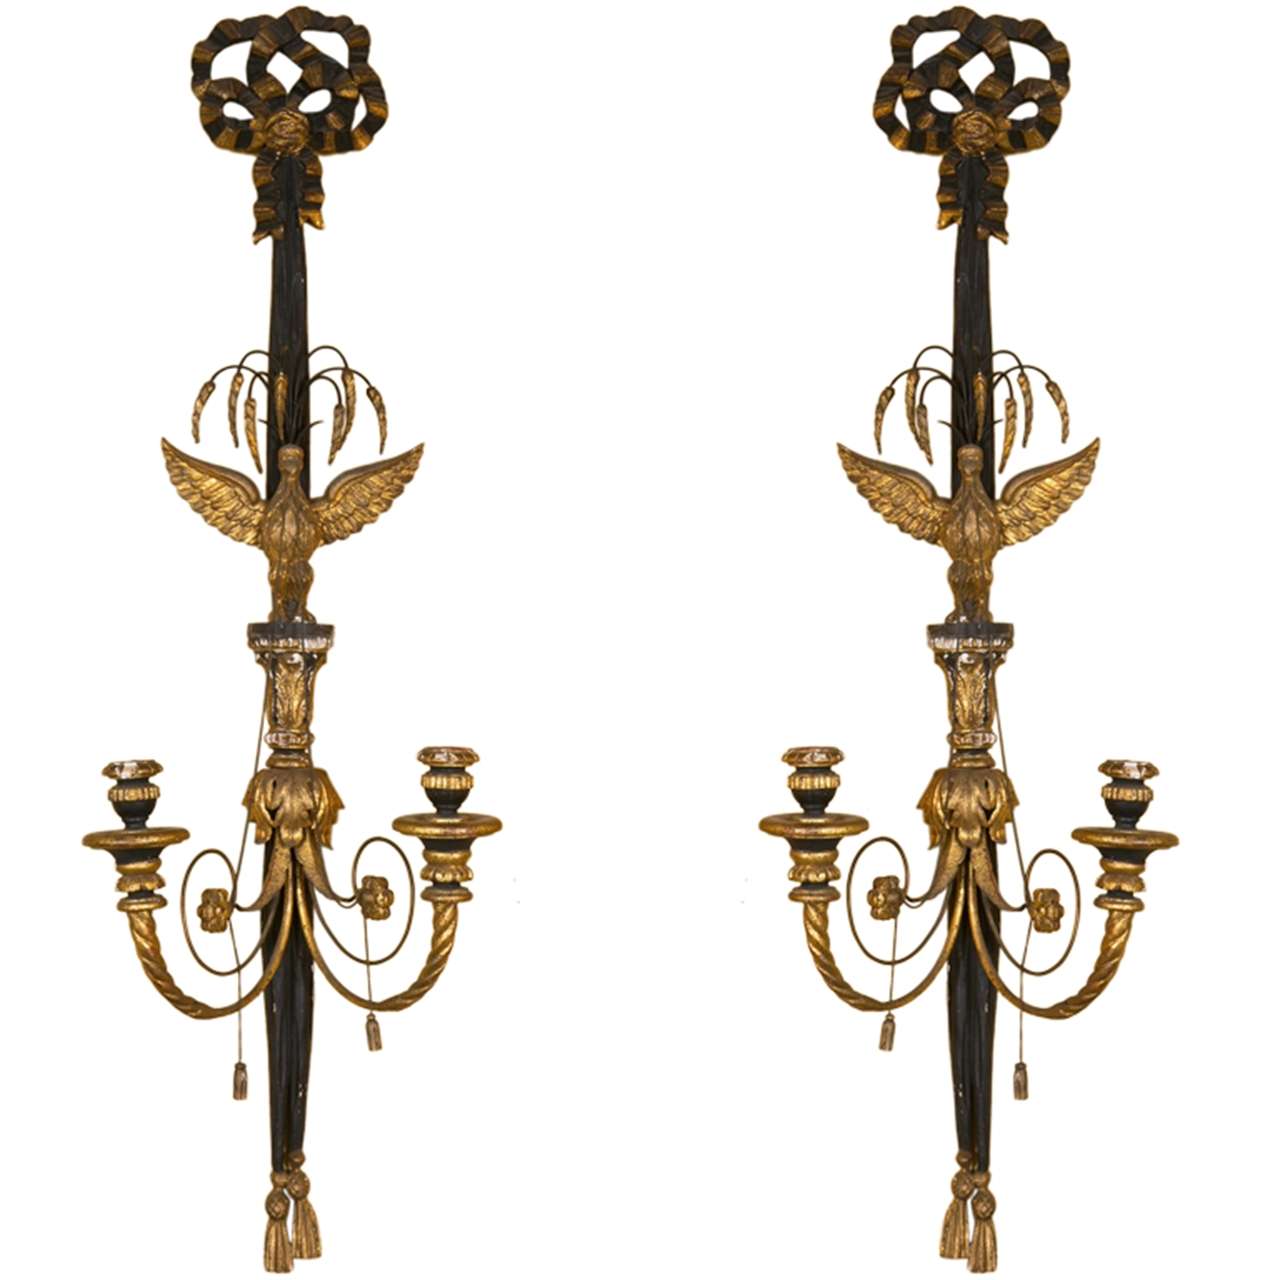 Pair of Federal Eagle Carved Gilt Wall Sconces, Two Lights, 19th Century